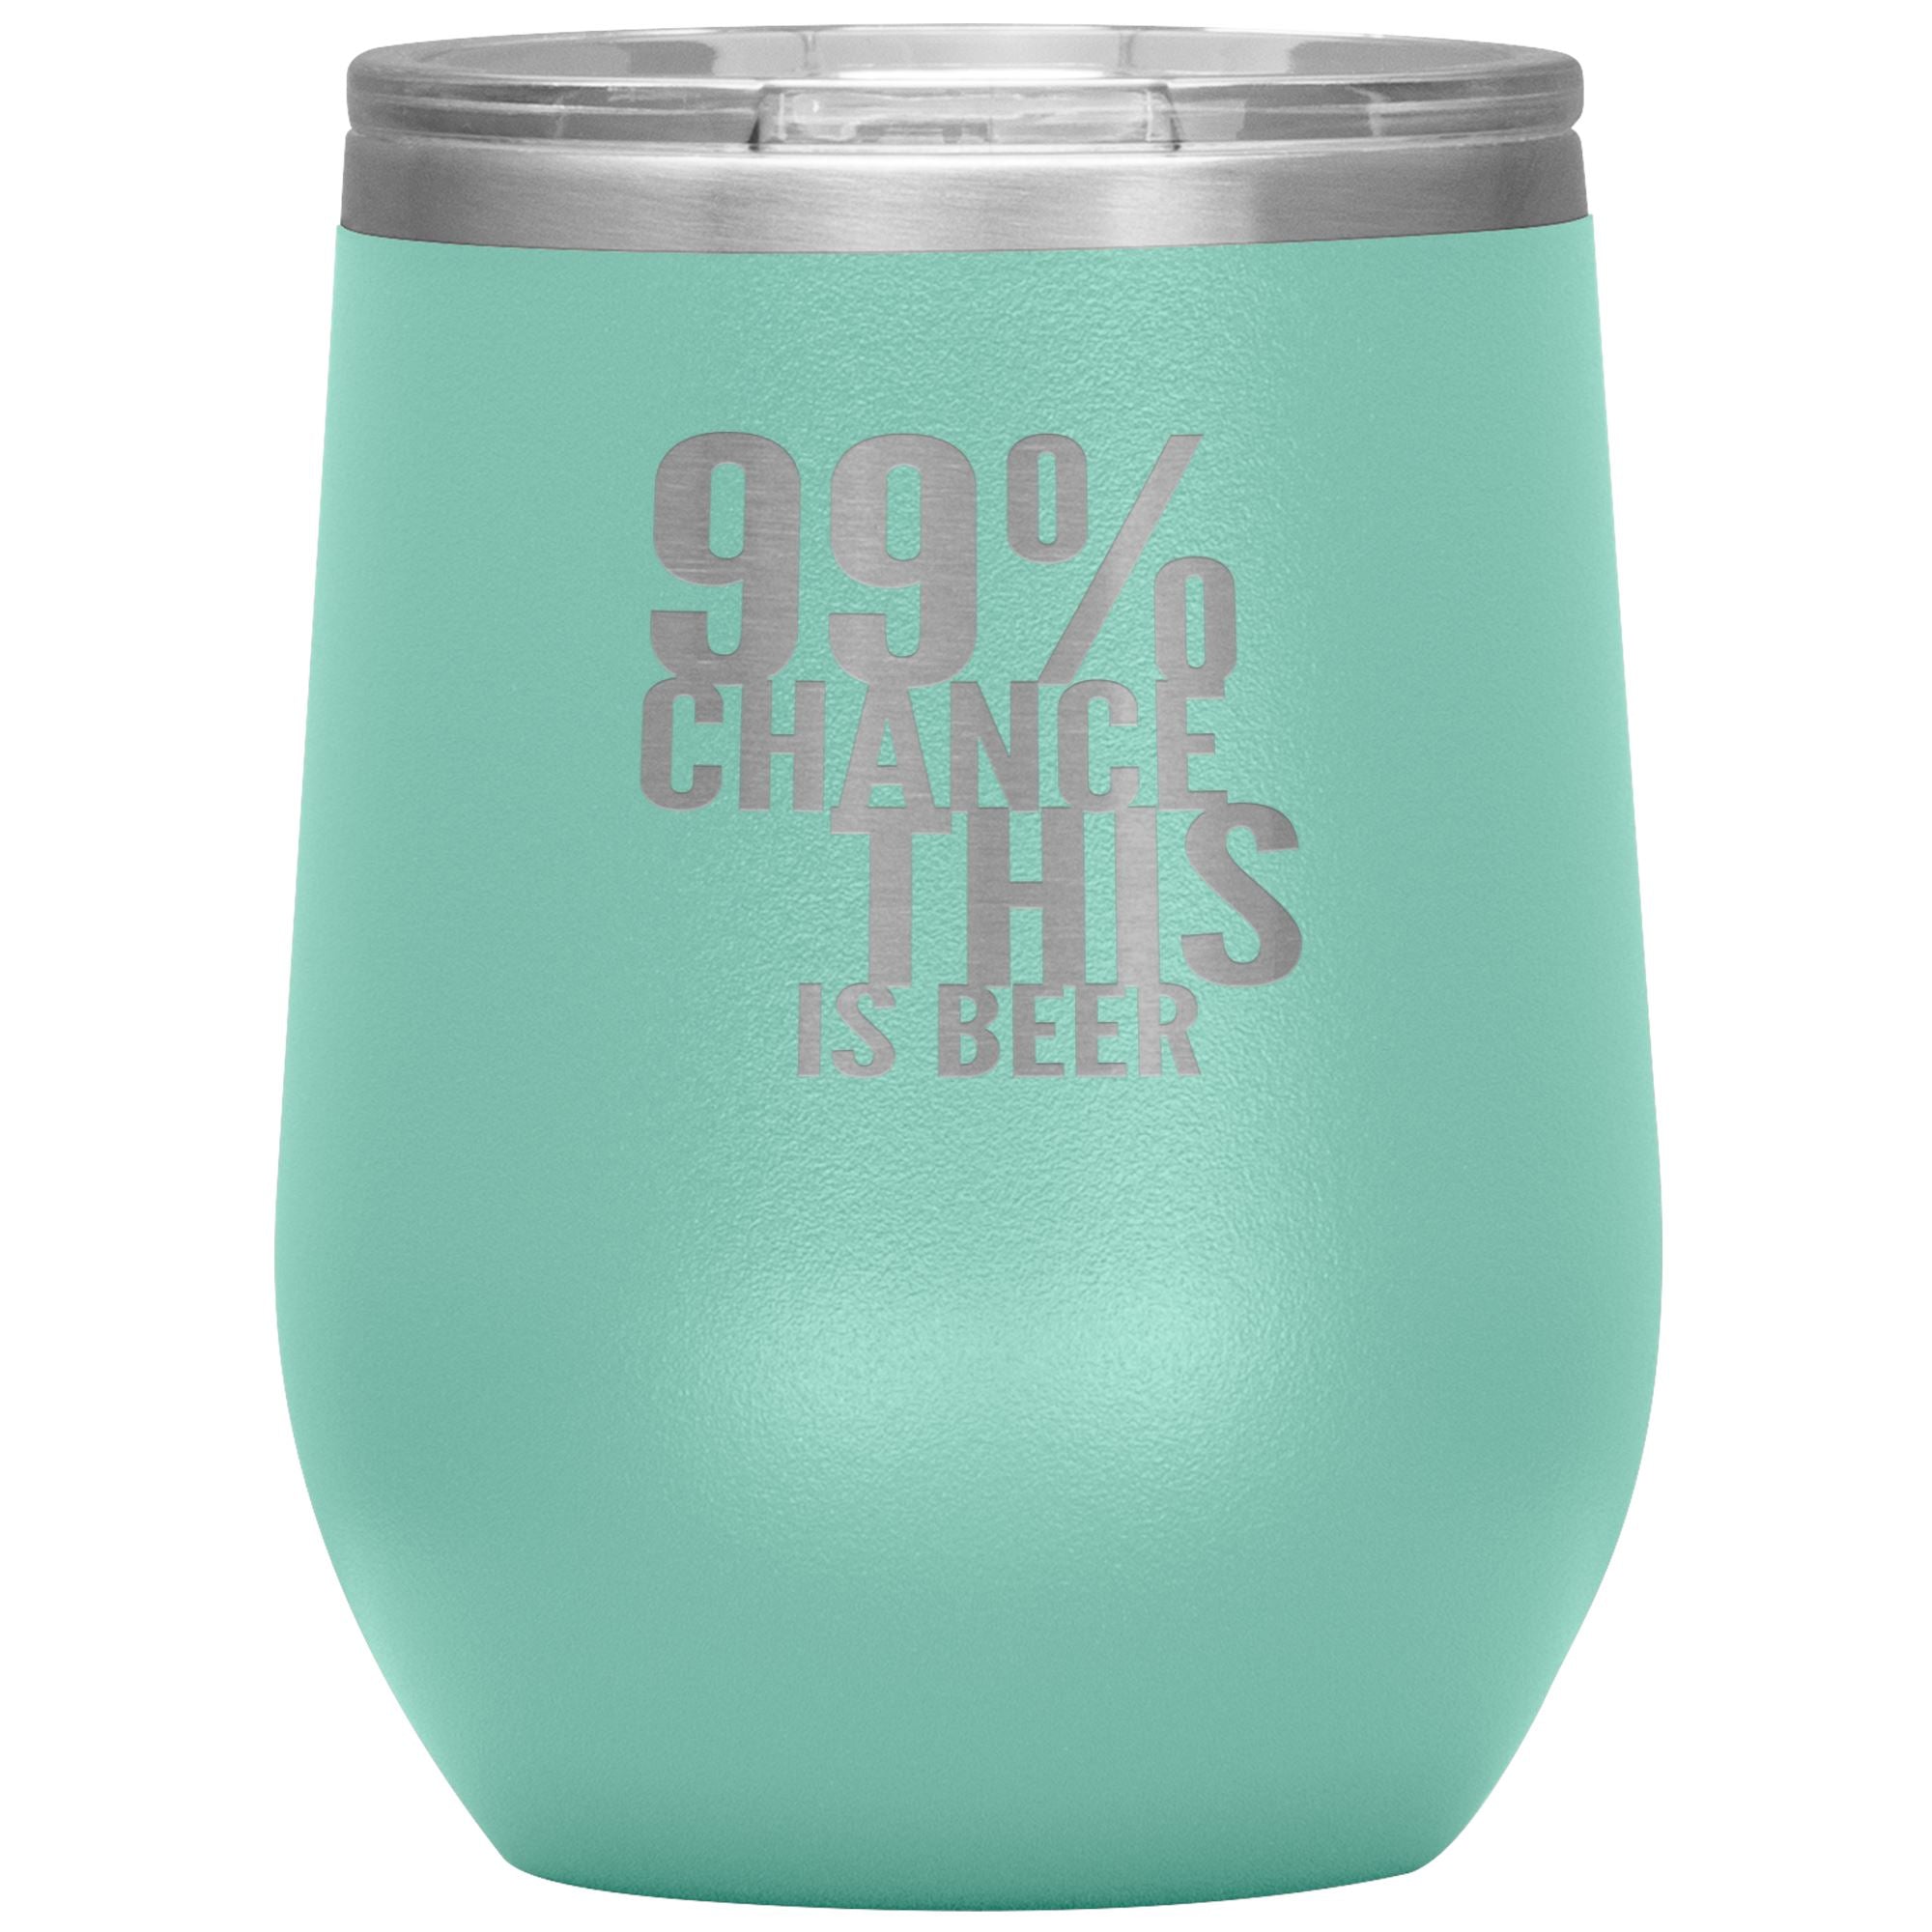 99 Percent Chance This Is Beer Wine 12oz Tumbler Wine Tumbler Teal 